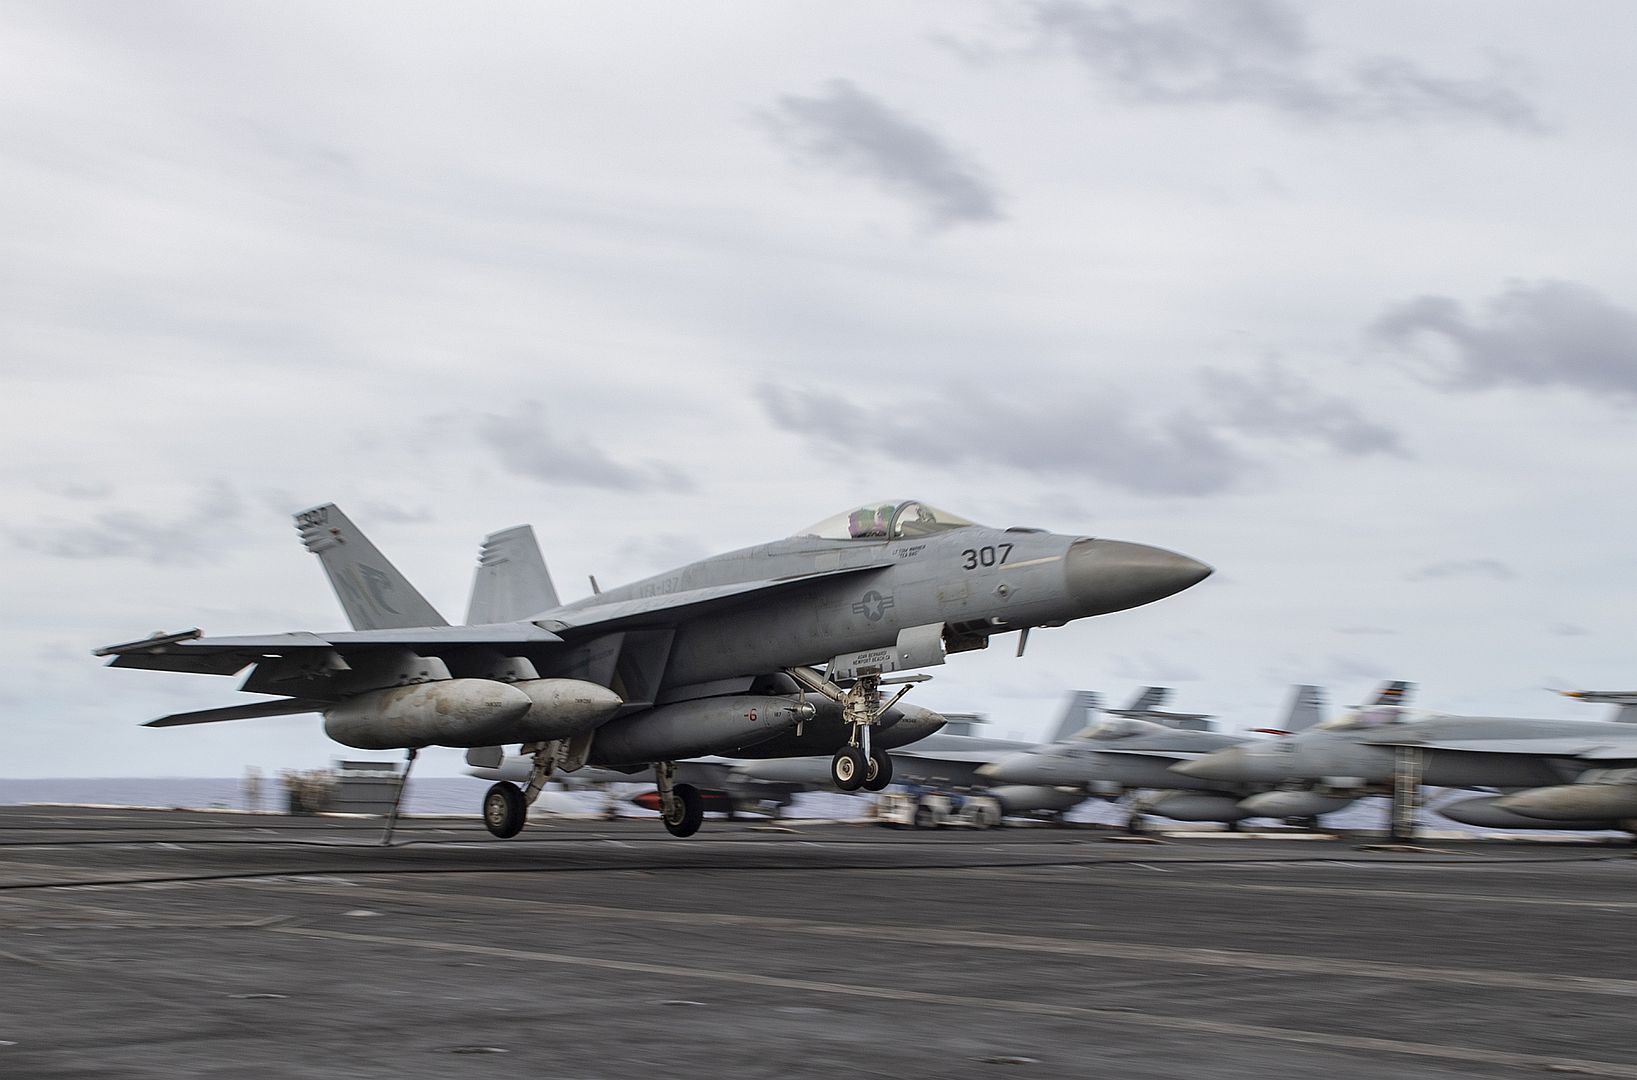 18E Super Hornet From The Kestrels Of Strike Fighter Squadron VFA 137 Makes An Arrested Landing On The Aircraft Carrier USS Nimitz